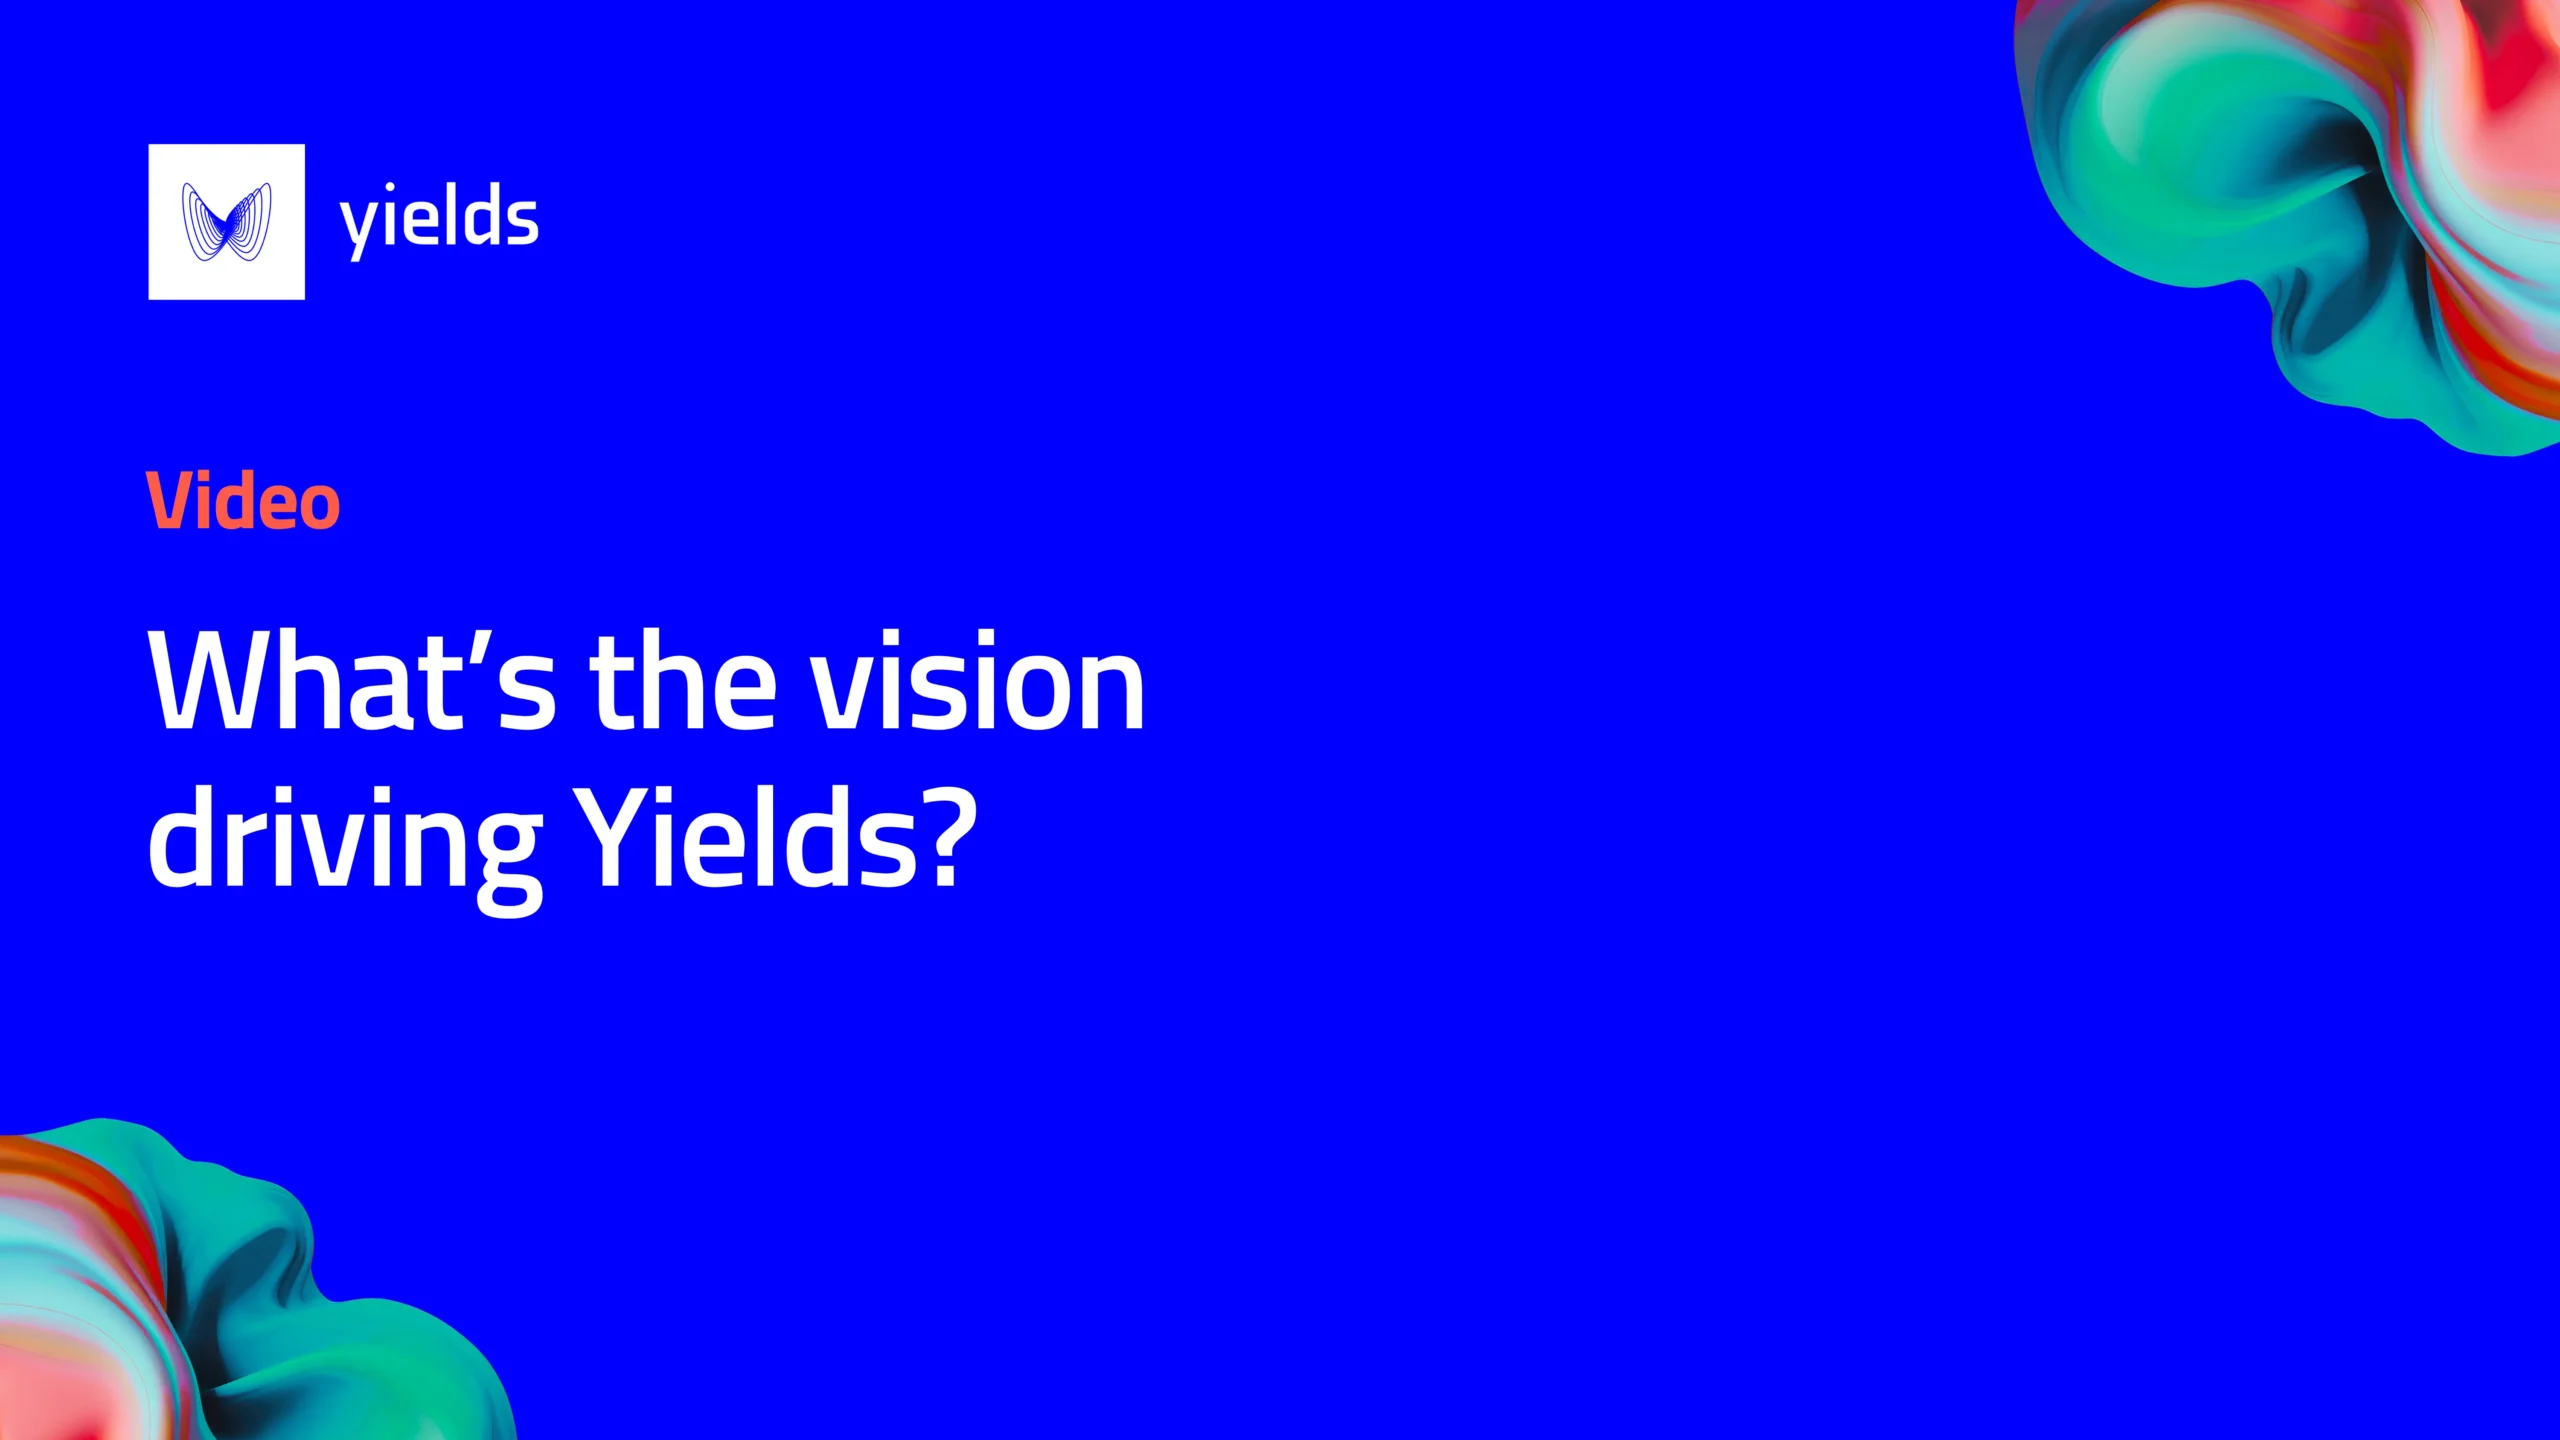 What’s the vision driving Yields?